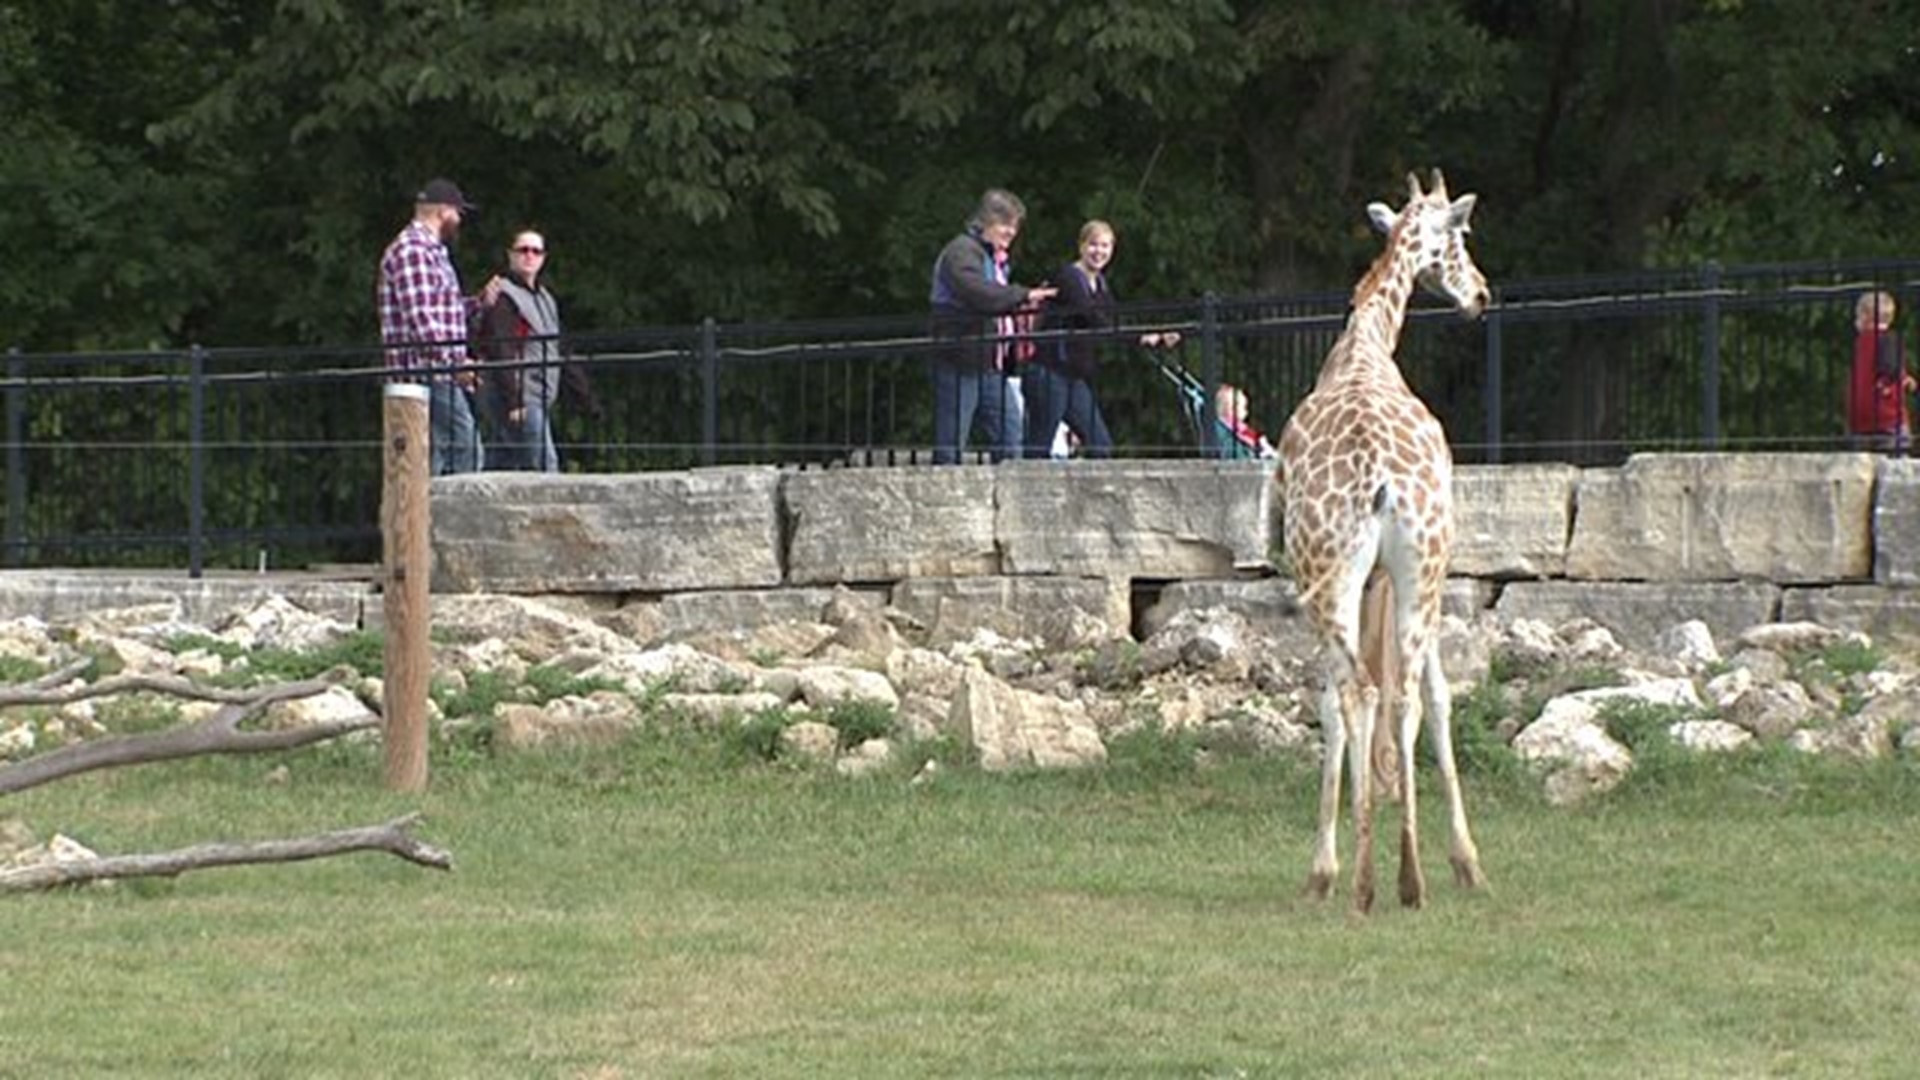 Niabi Zoo director says zoo is "not in crisis, but transition"